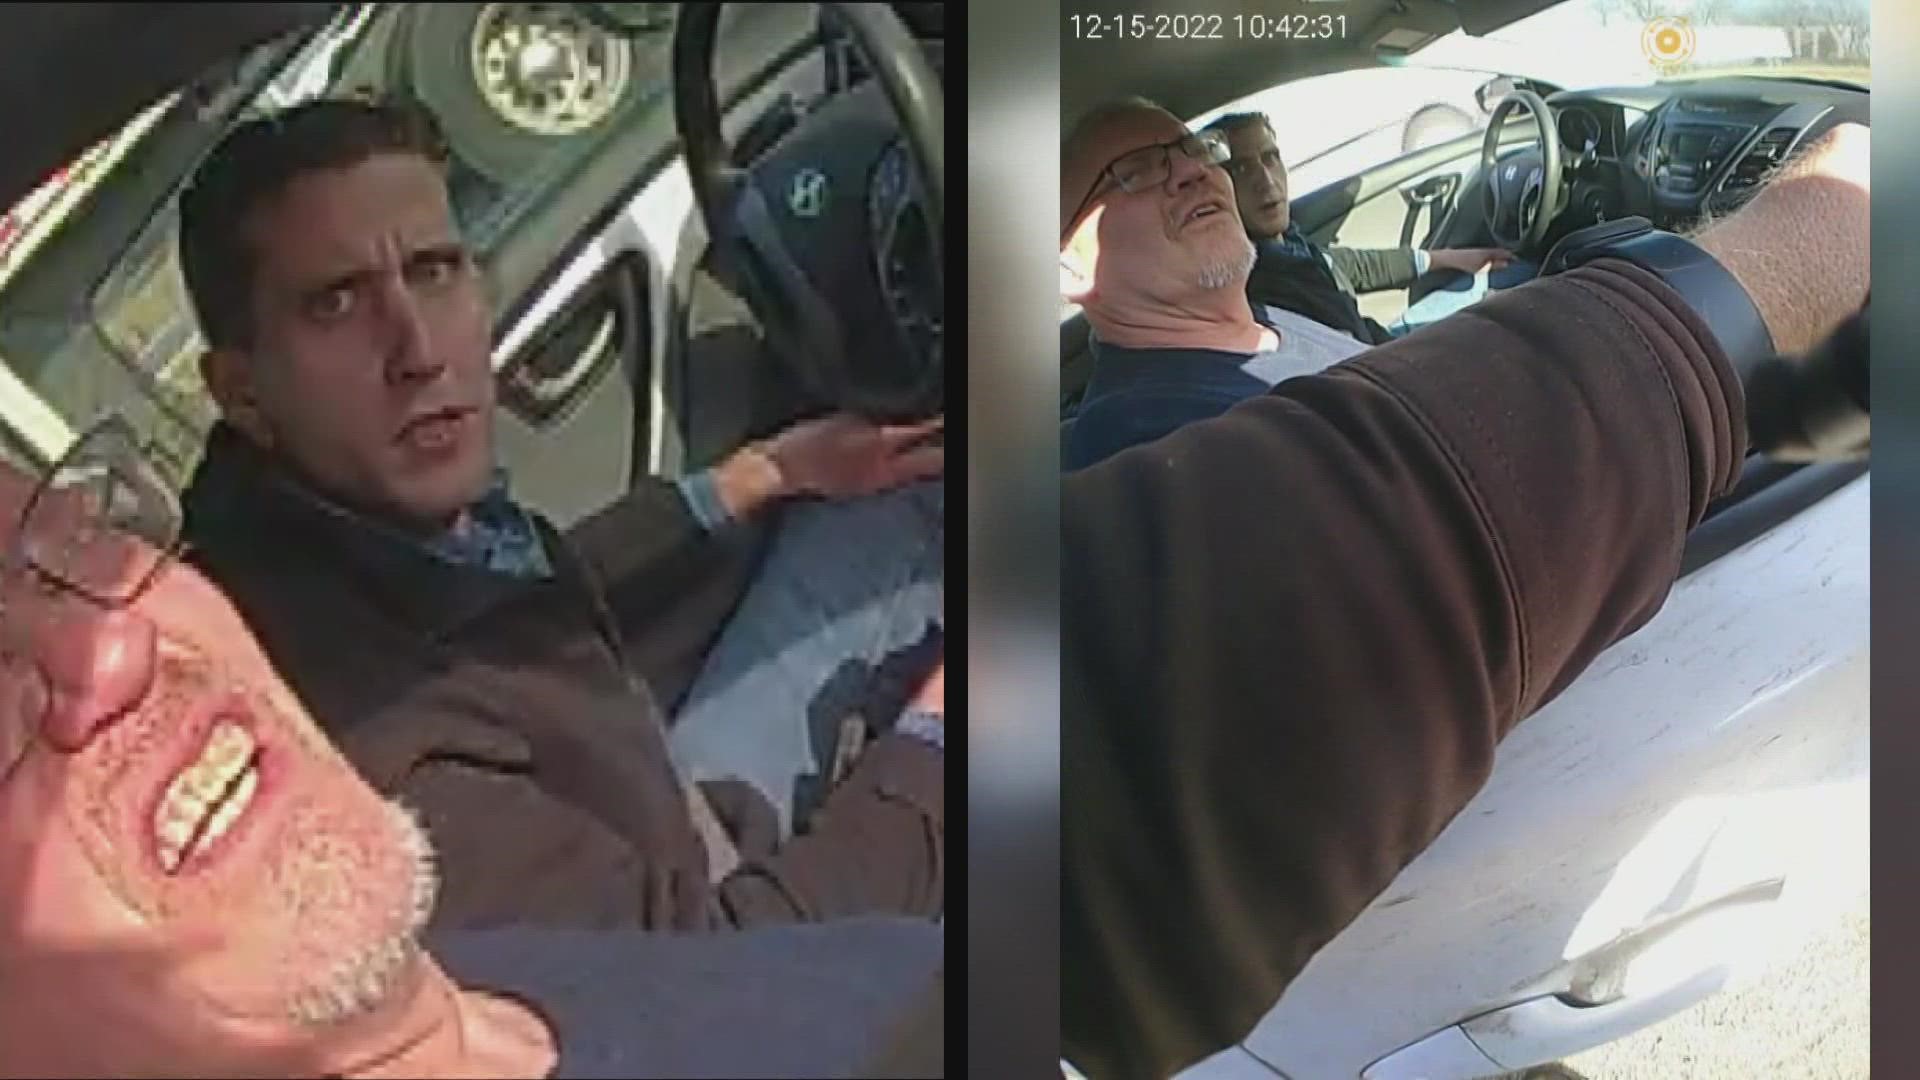 Body cam videos show Indiana troopers pulling Kohberger and his dad over for tailgating on December 15th.